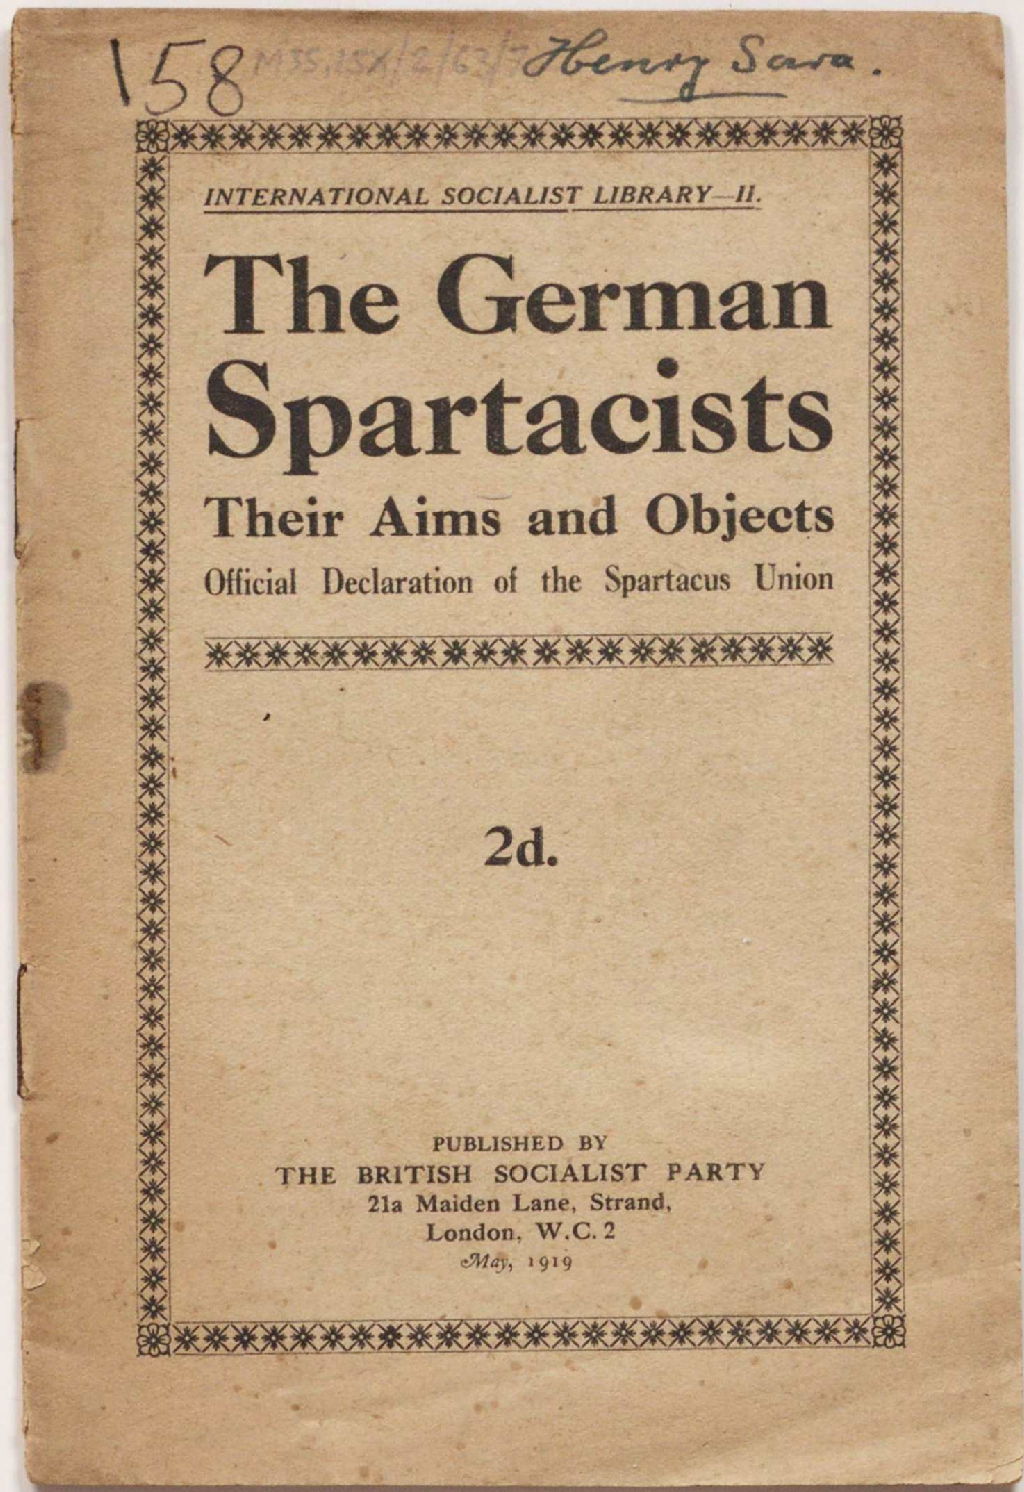 The German Spartacists